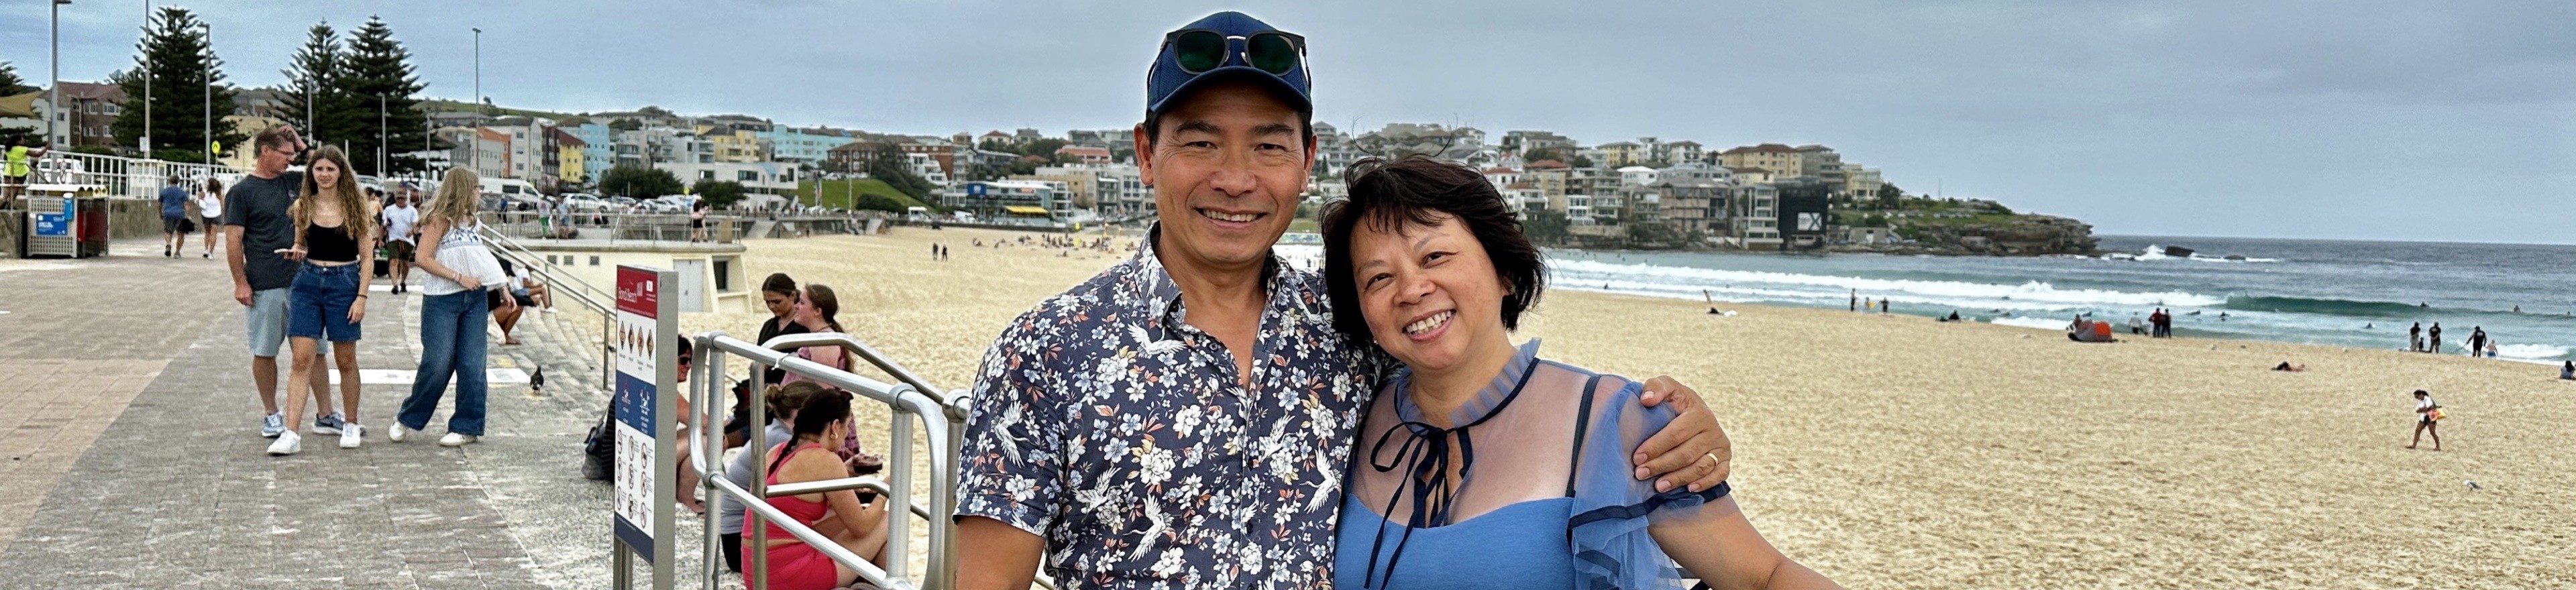 A couple smiling for a photo on the sandy beach, with the ocean in the background.